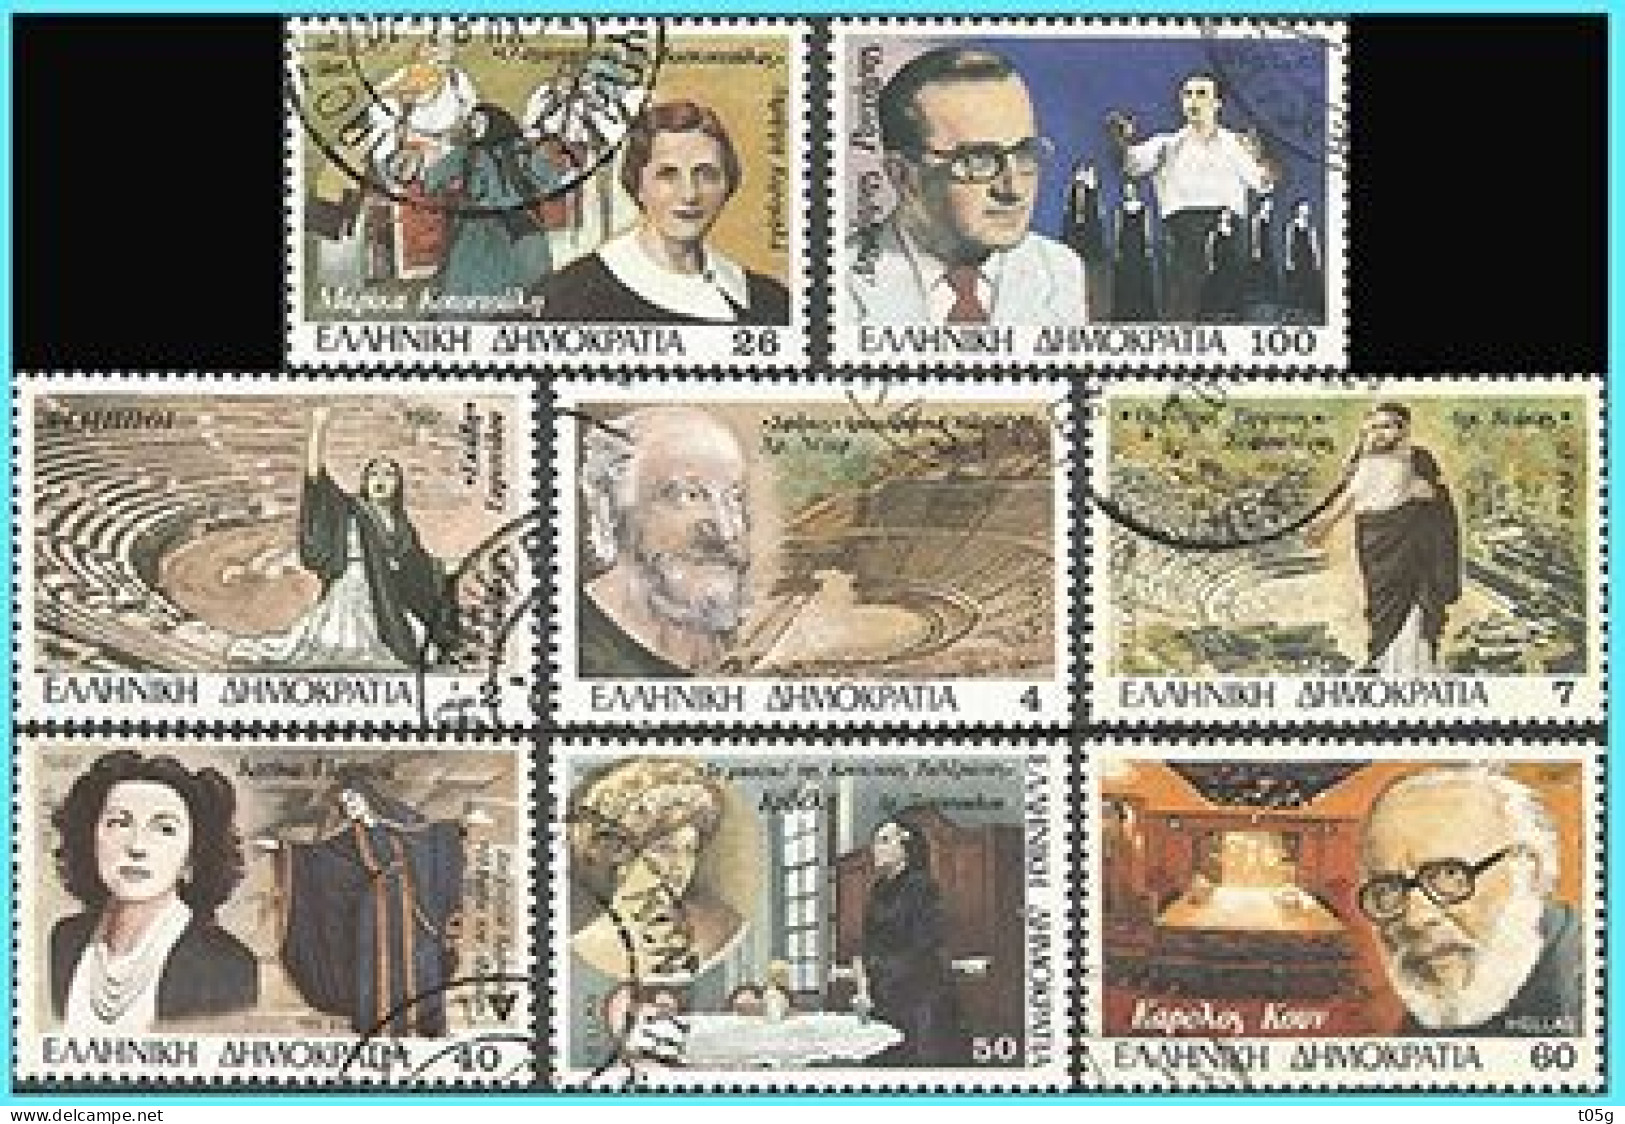 GREECE- GRECE- HELLAS 1987:  Compl. Set Used - Used Stamps